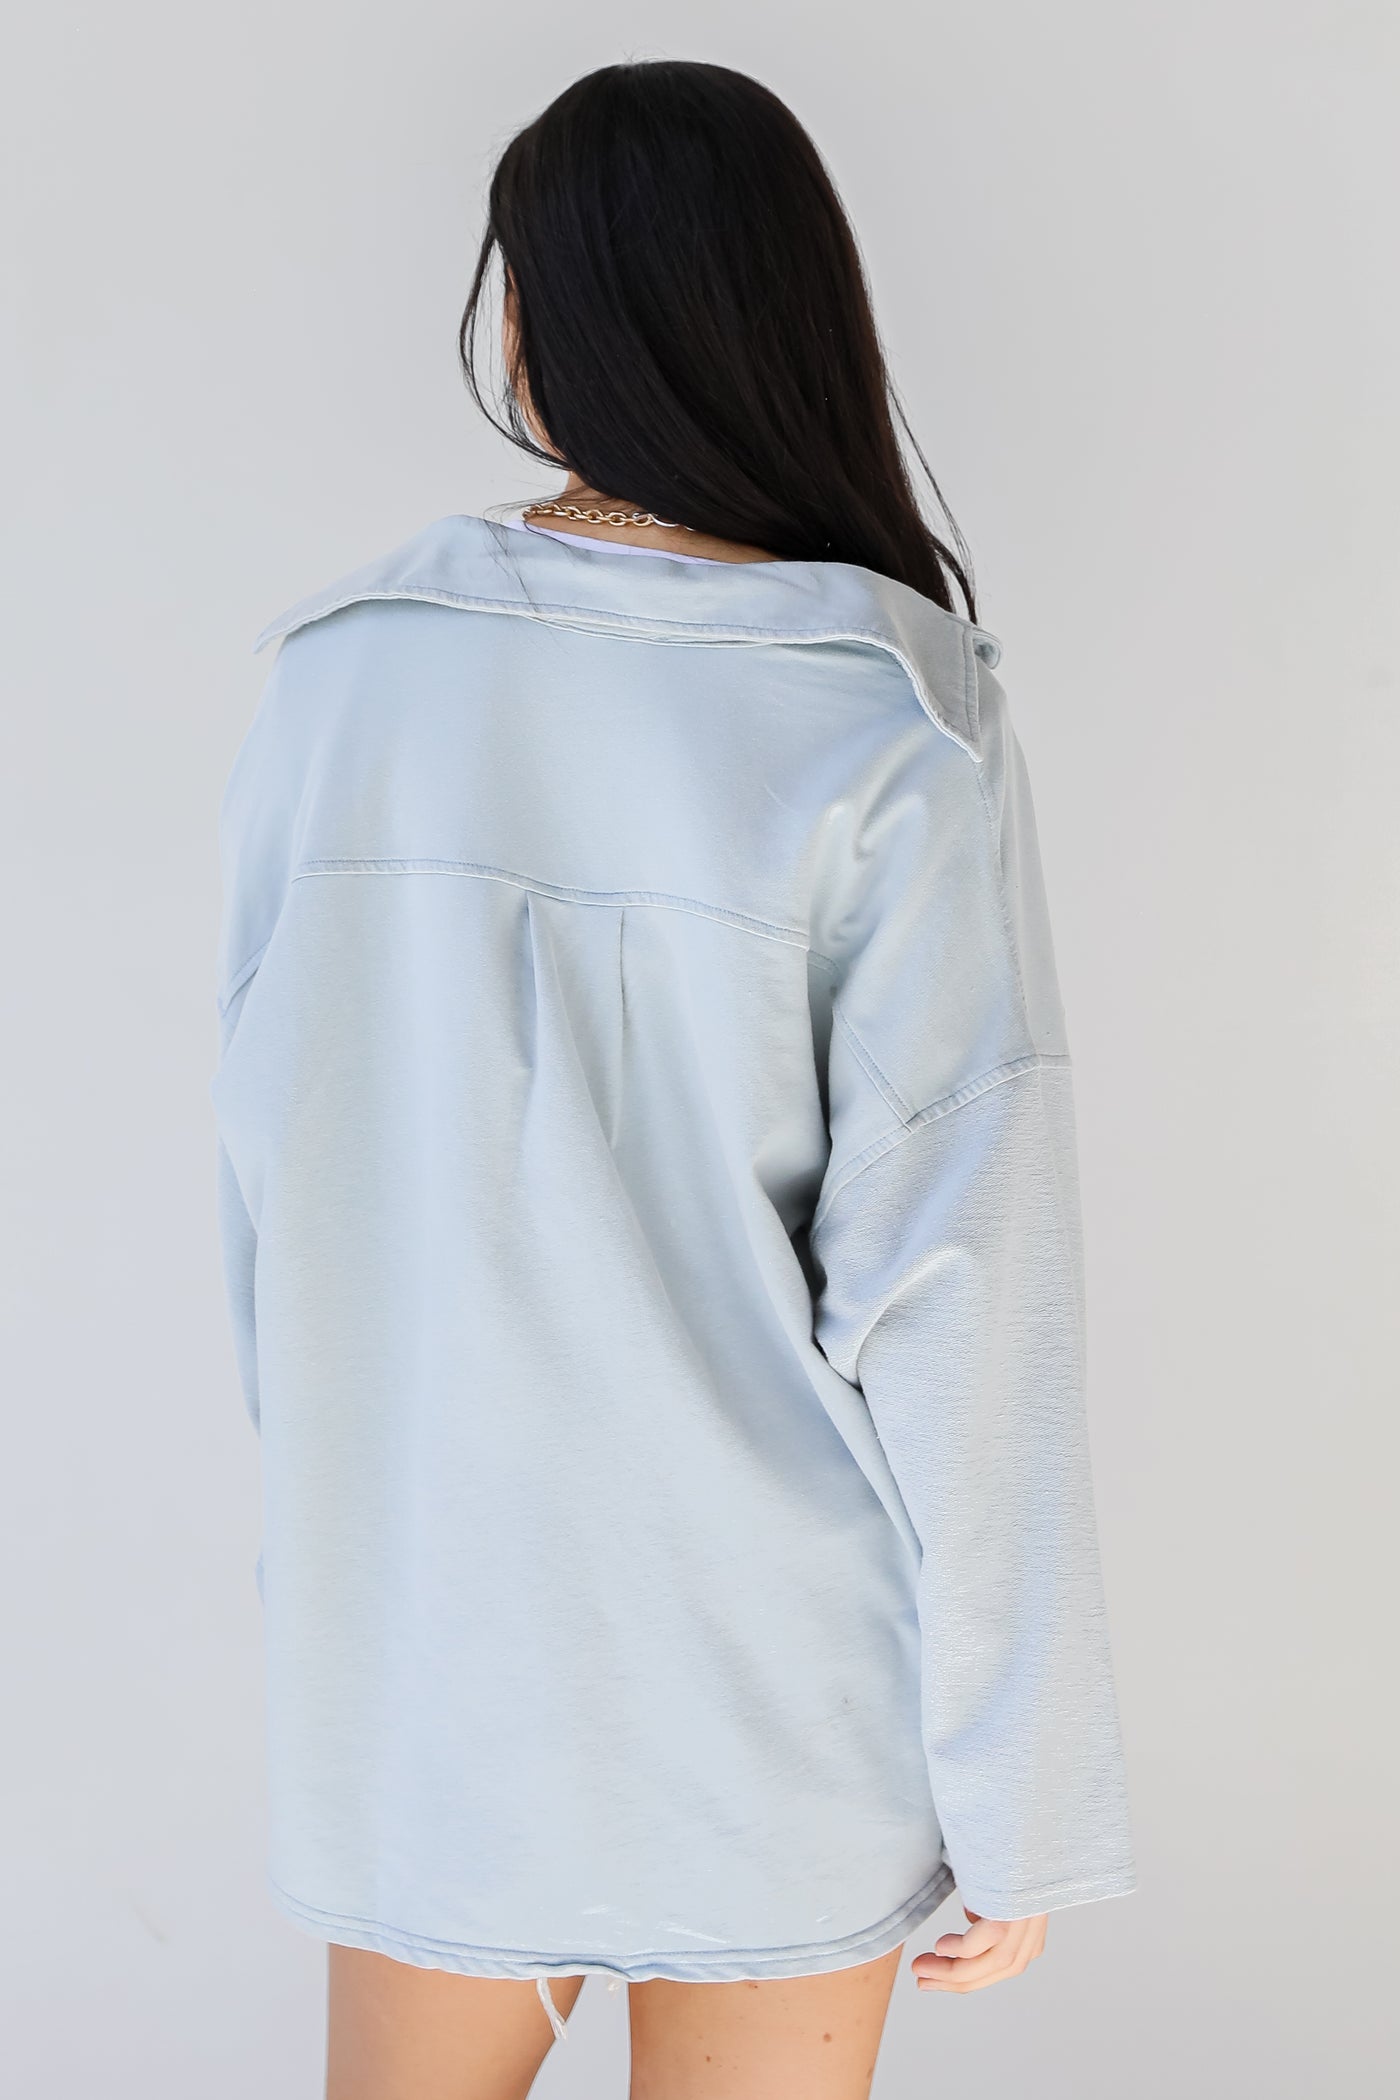 Shacket in light blue back view